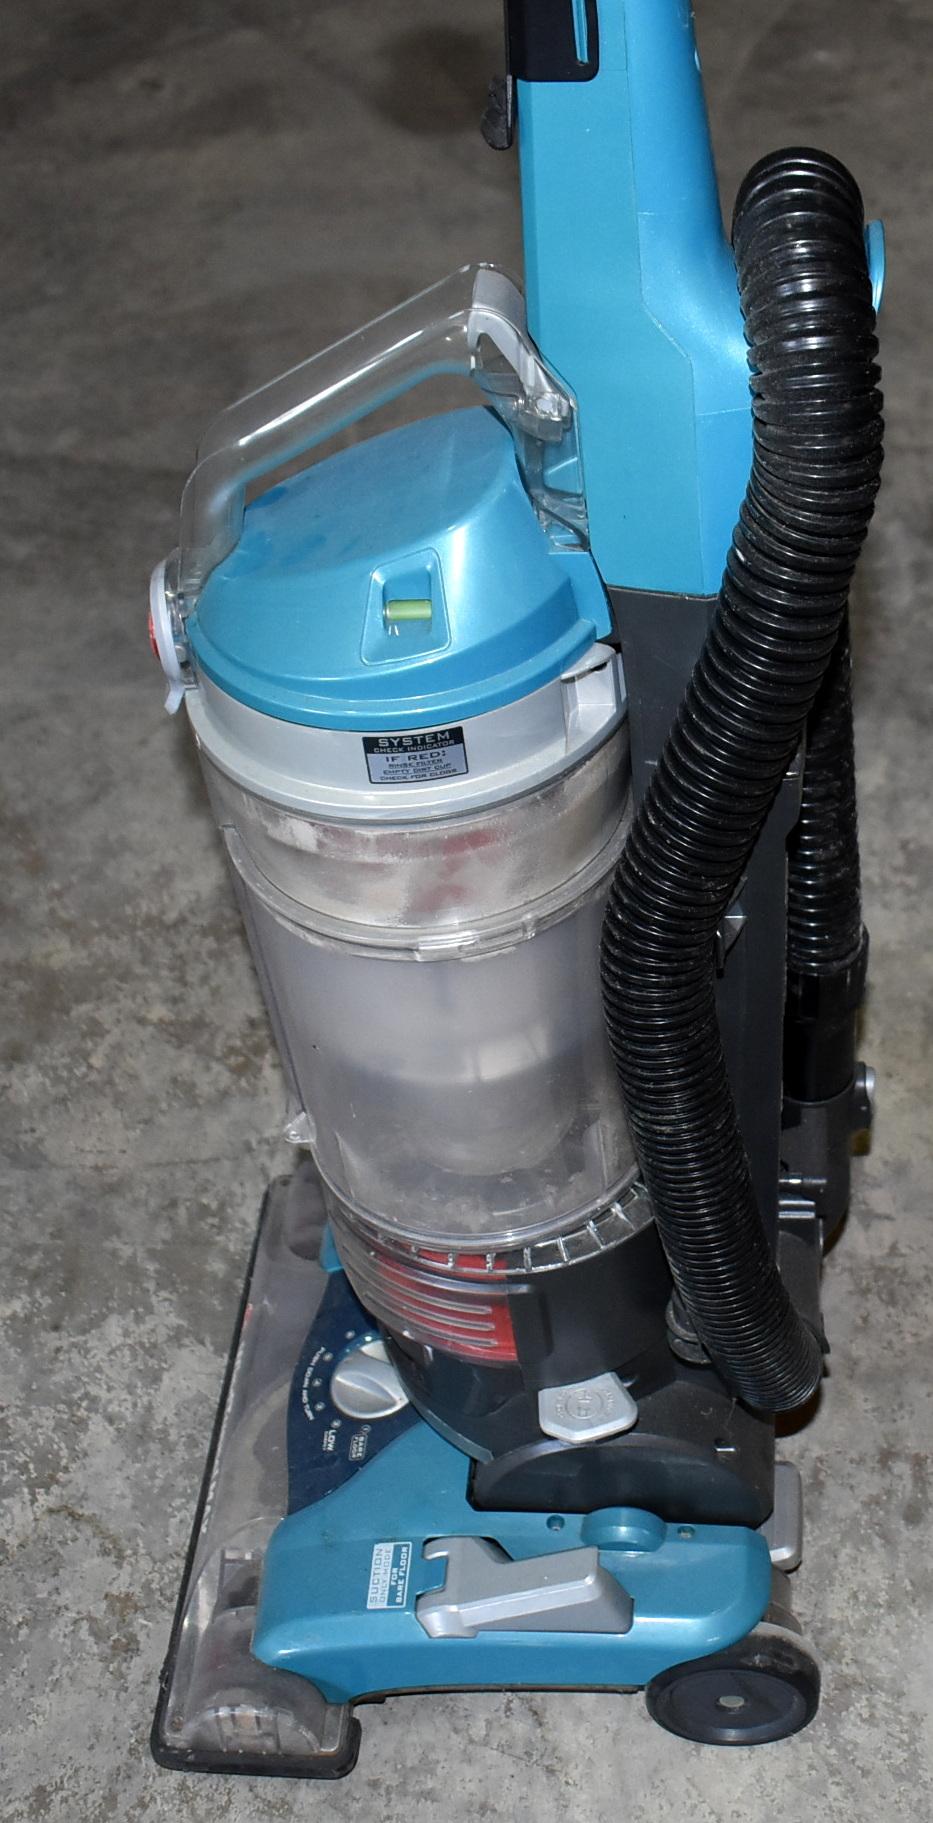 WIND TUNNEL UPRIGHT VACUUM CLEANER